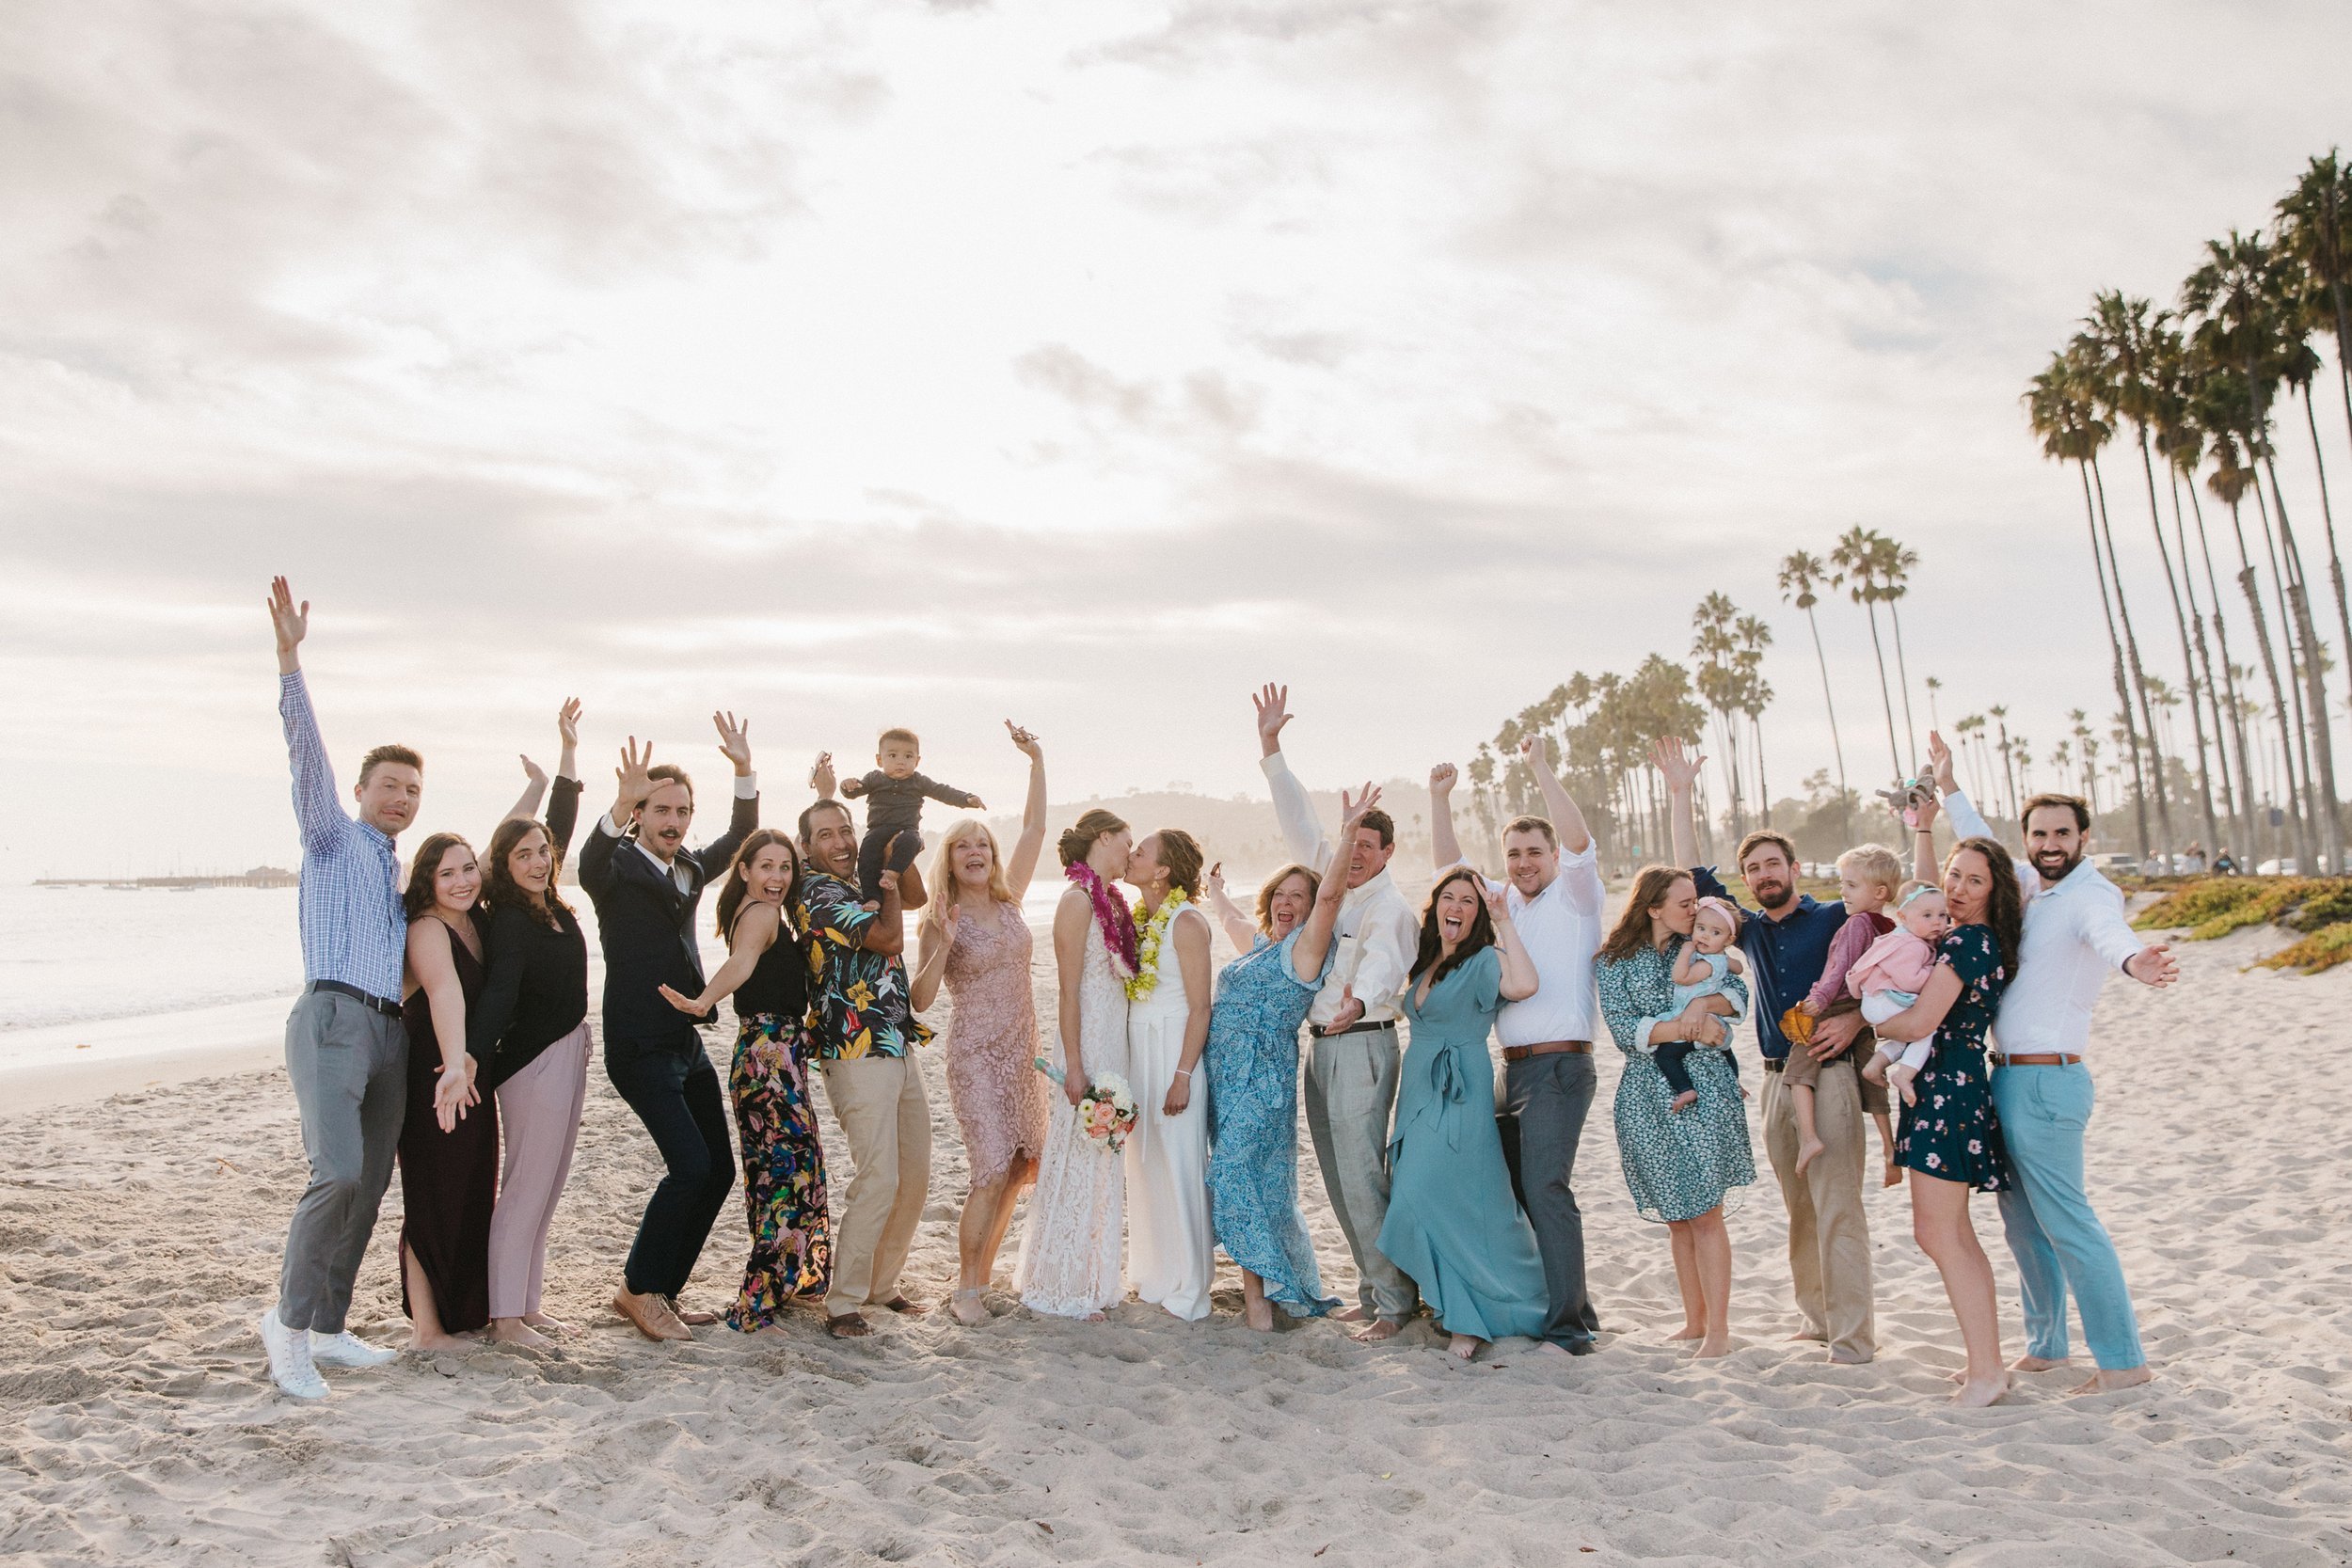 www.santabarbarawedding.com | Lerina Winter | Danny Miles | Lulus | Nordstrom | Brides with Guests Celebrating at the Beach 